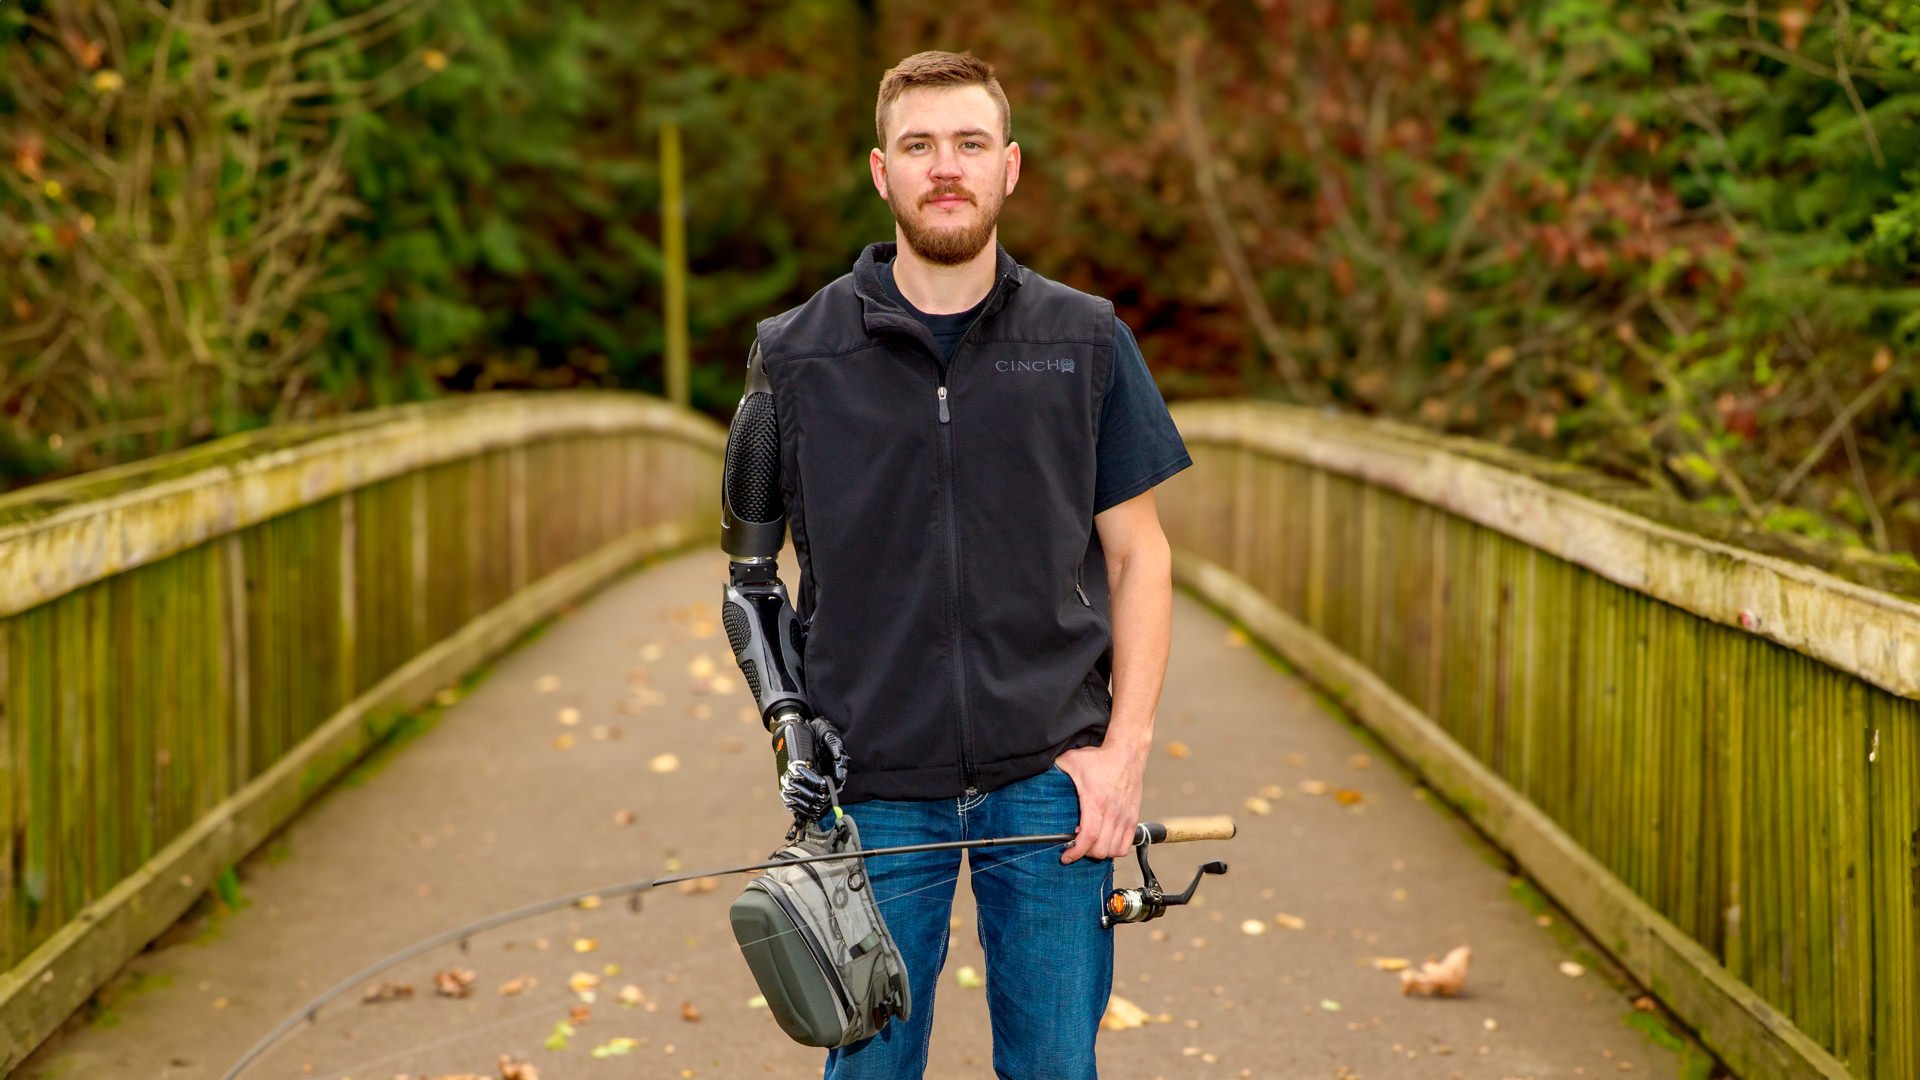 Sam Rosecrans fishing with his shoulder level myoelectric prosthesis in Portland